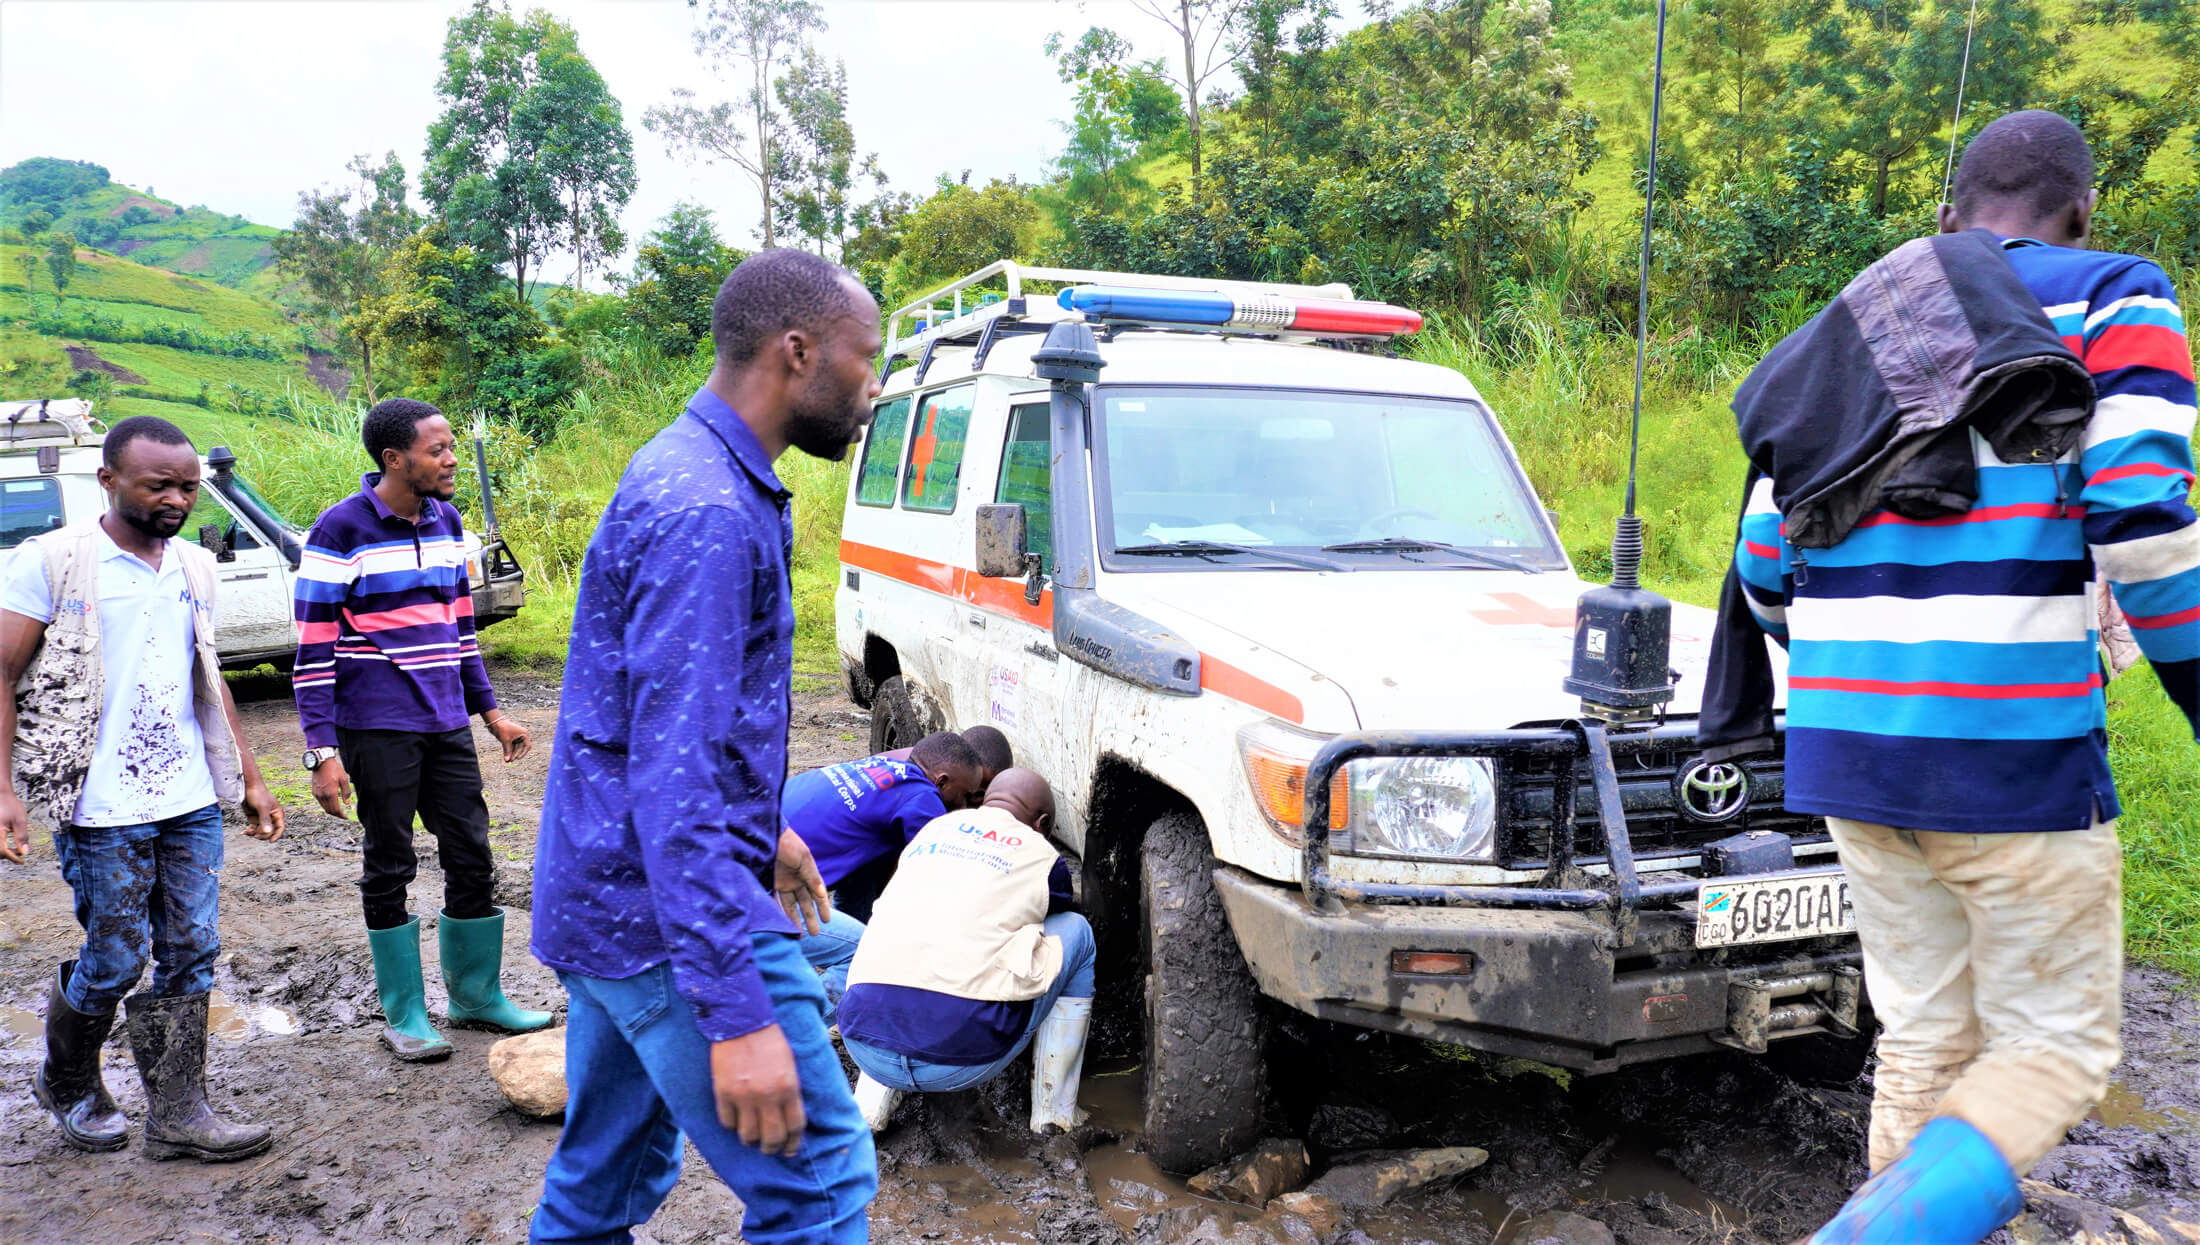 Deploying to the Kasunyu health area in Minova health zone was difficult, so International Medical Corps staff and community members had to work together.